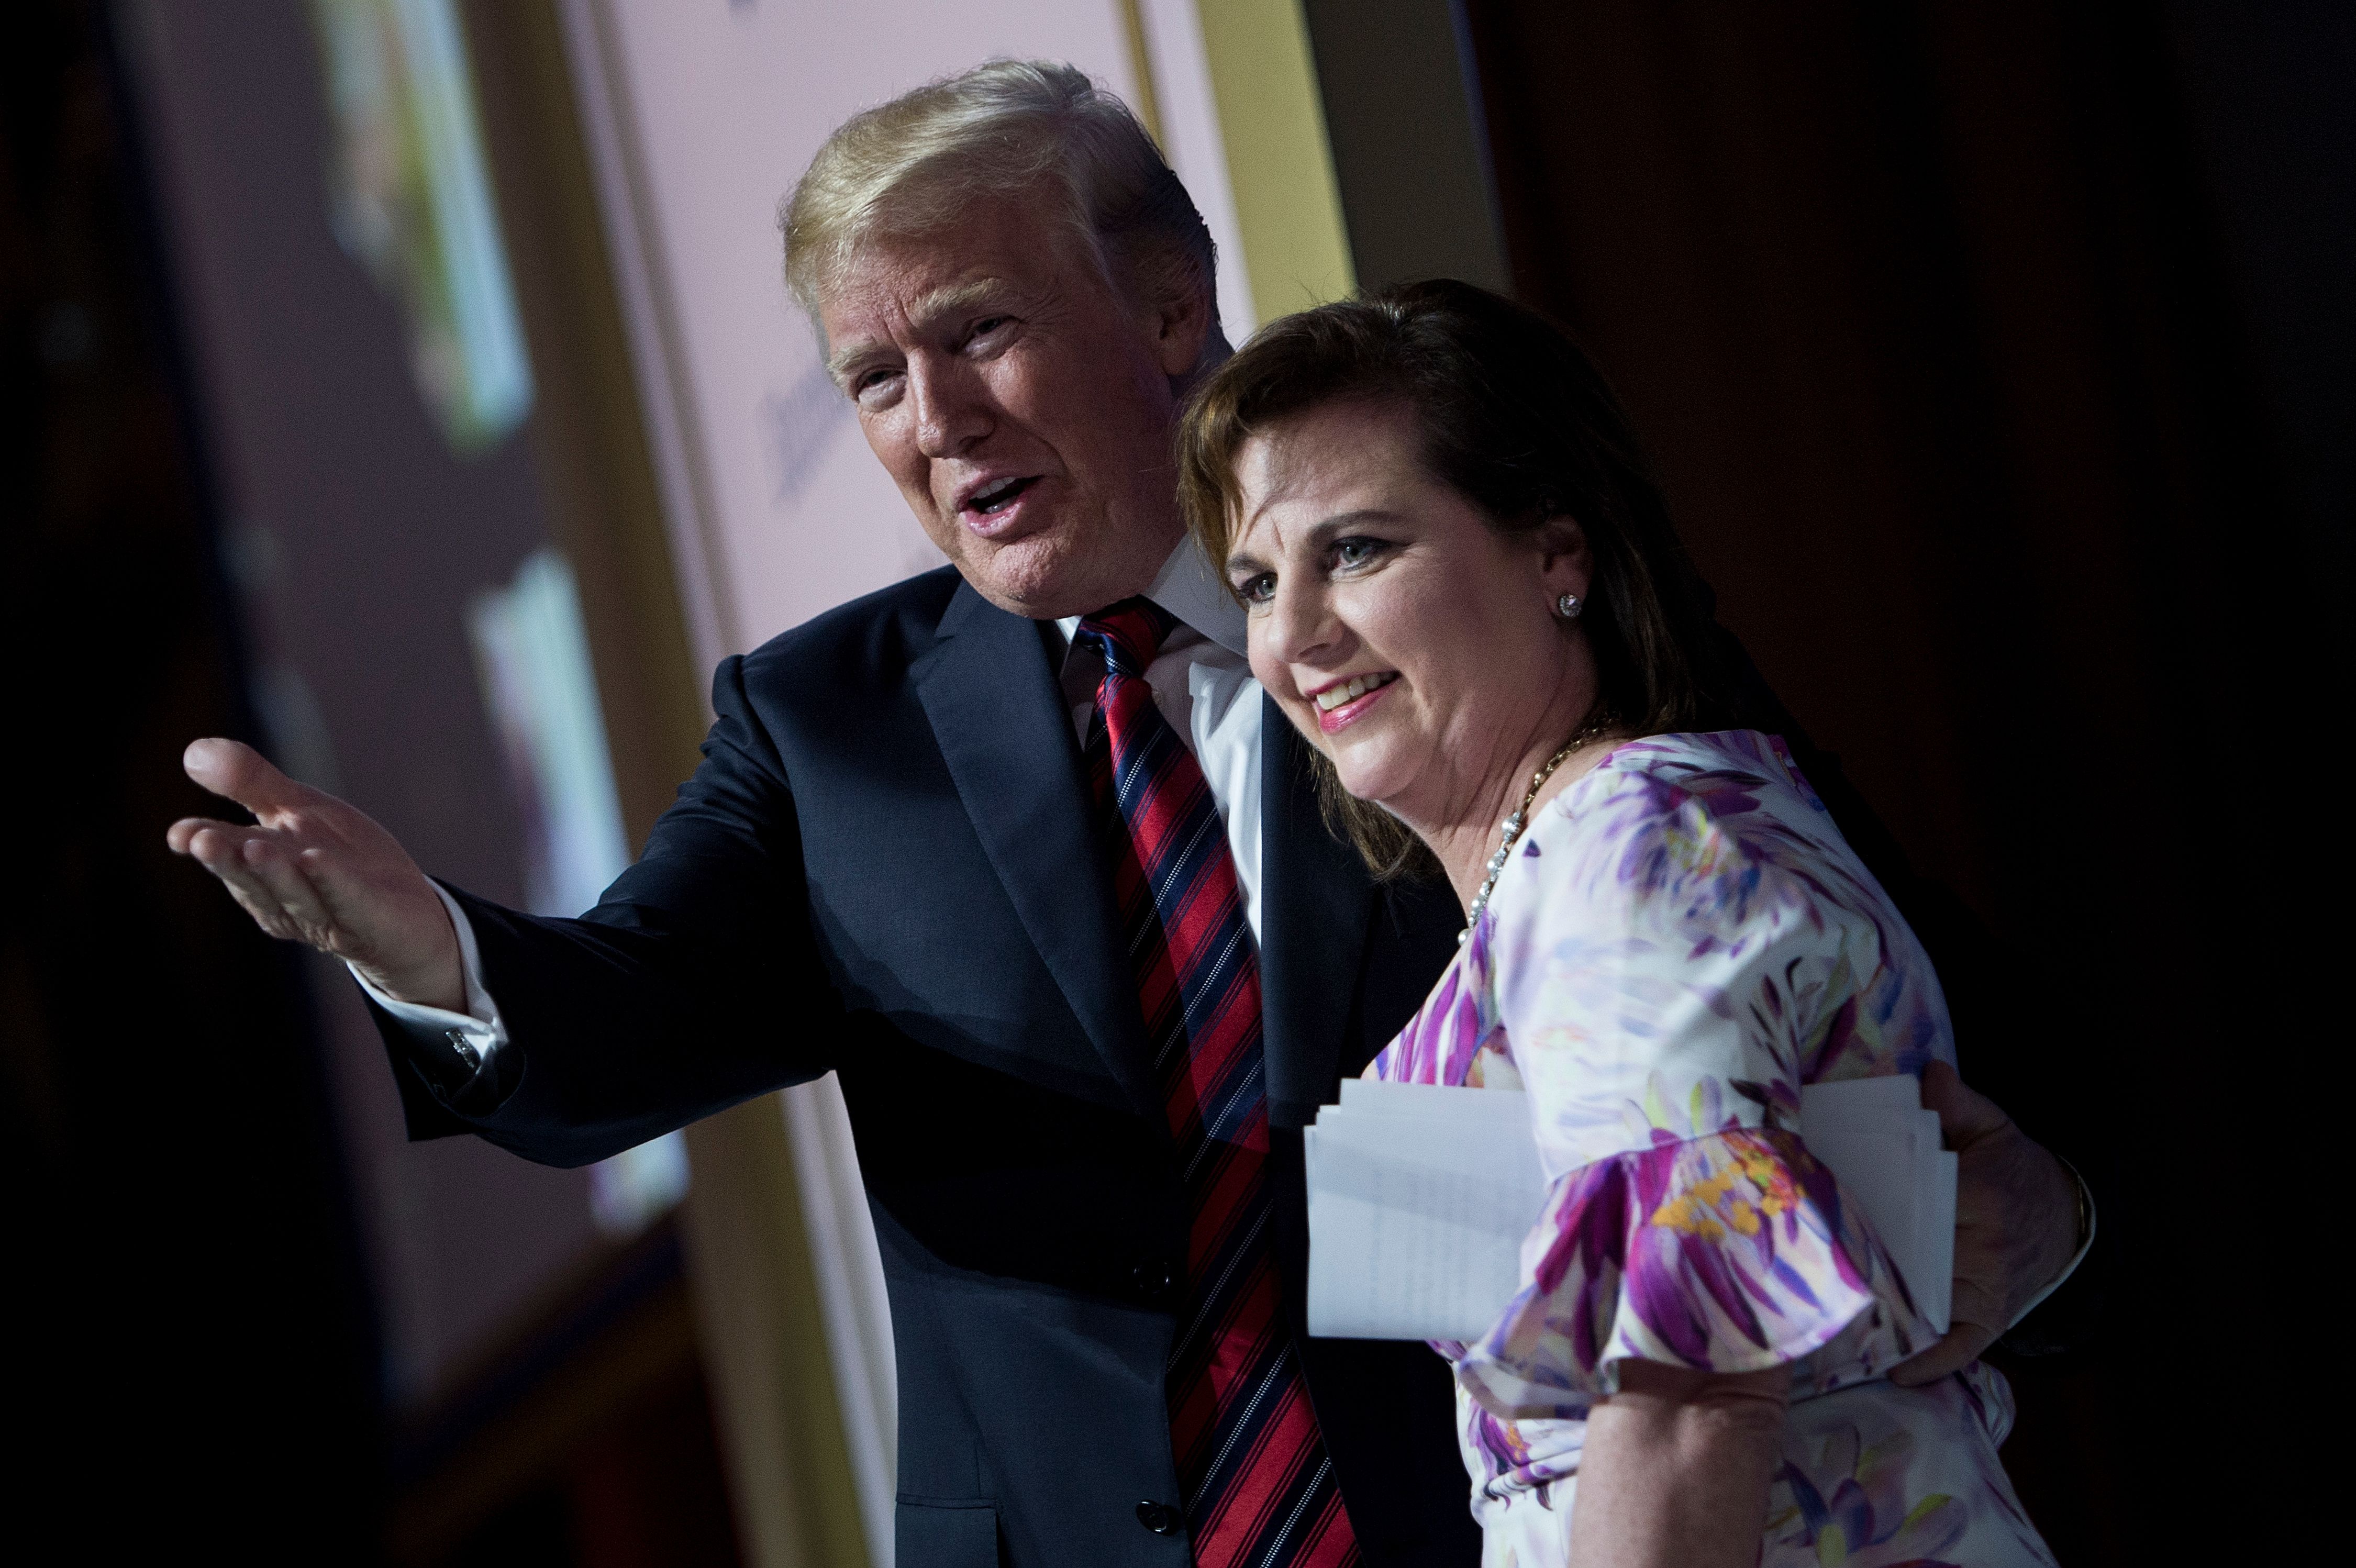 US President Donald Trump (L) and Marjorie Dannenfelser, President of Susan B. Anthony List, talk during the Susan B. Anthony List 11th Annual Campaign for Life Gala at the National Building Museum May 22, 2018 in Washington, DC. (BRENDAN SMIALOWSKI/AFP via Getty Images)